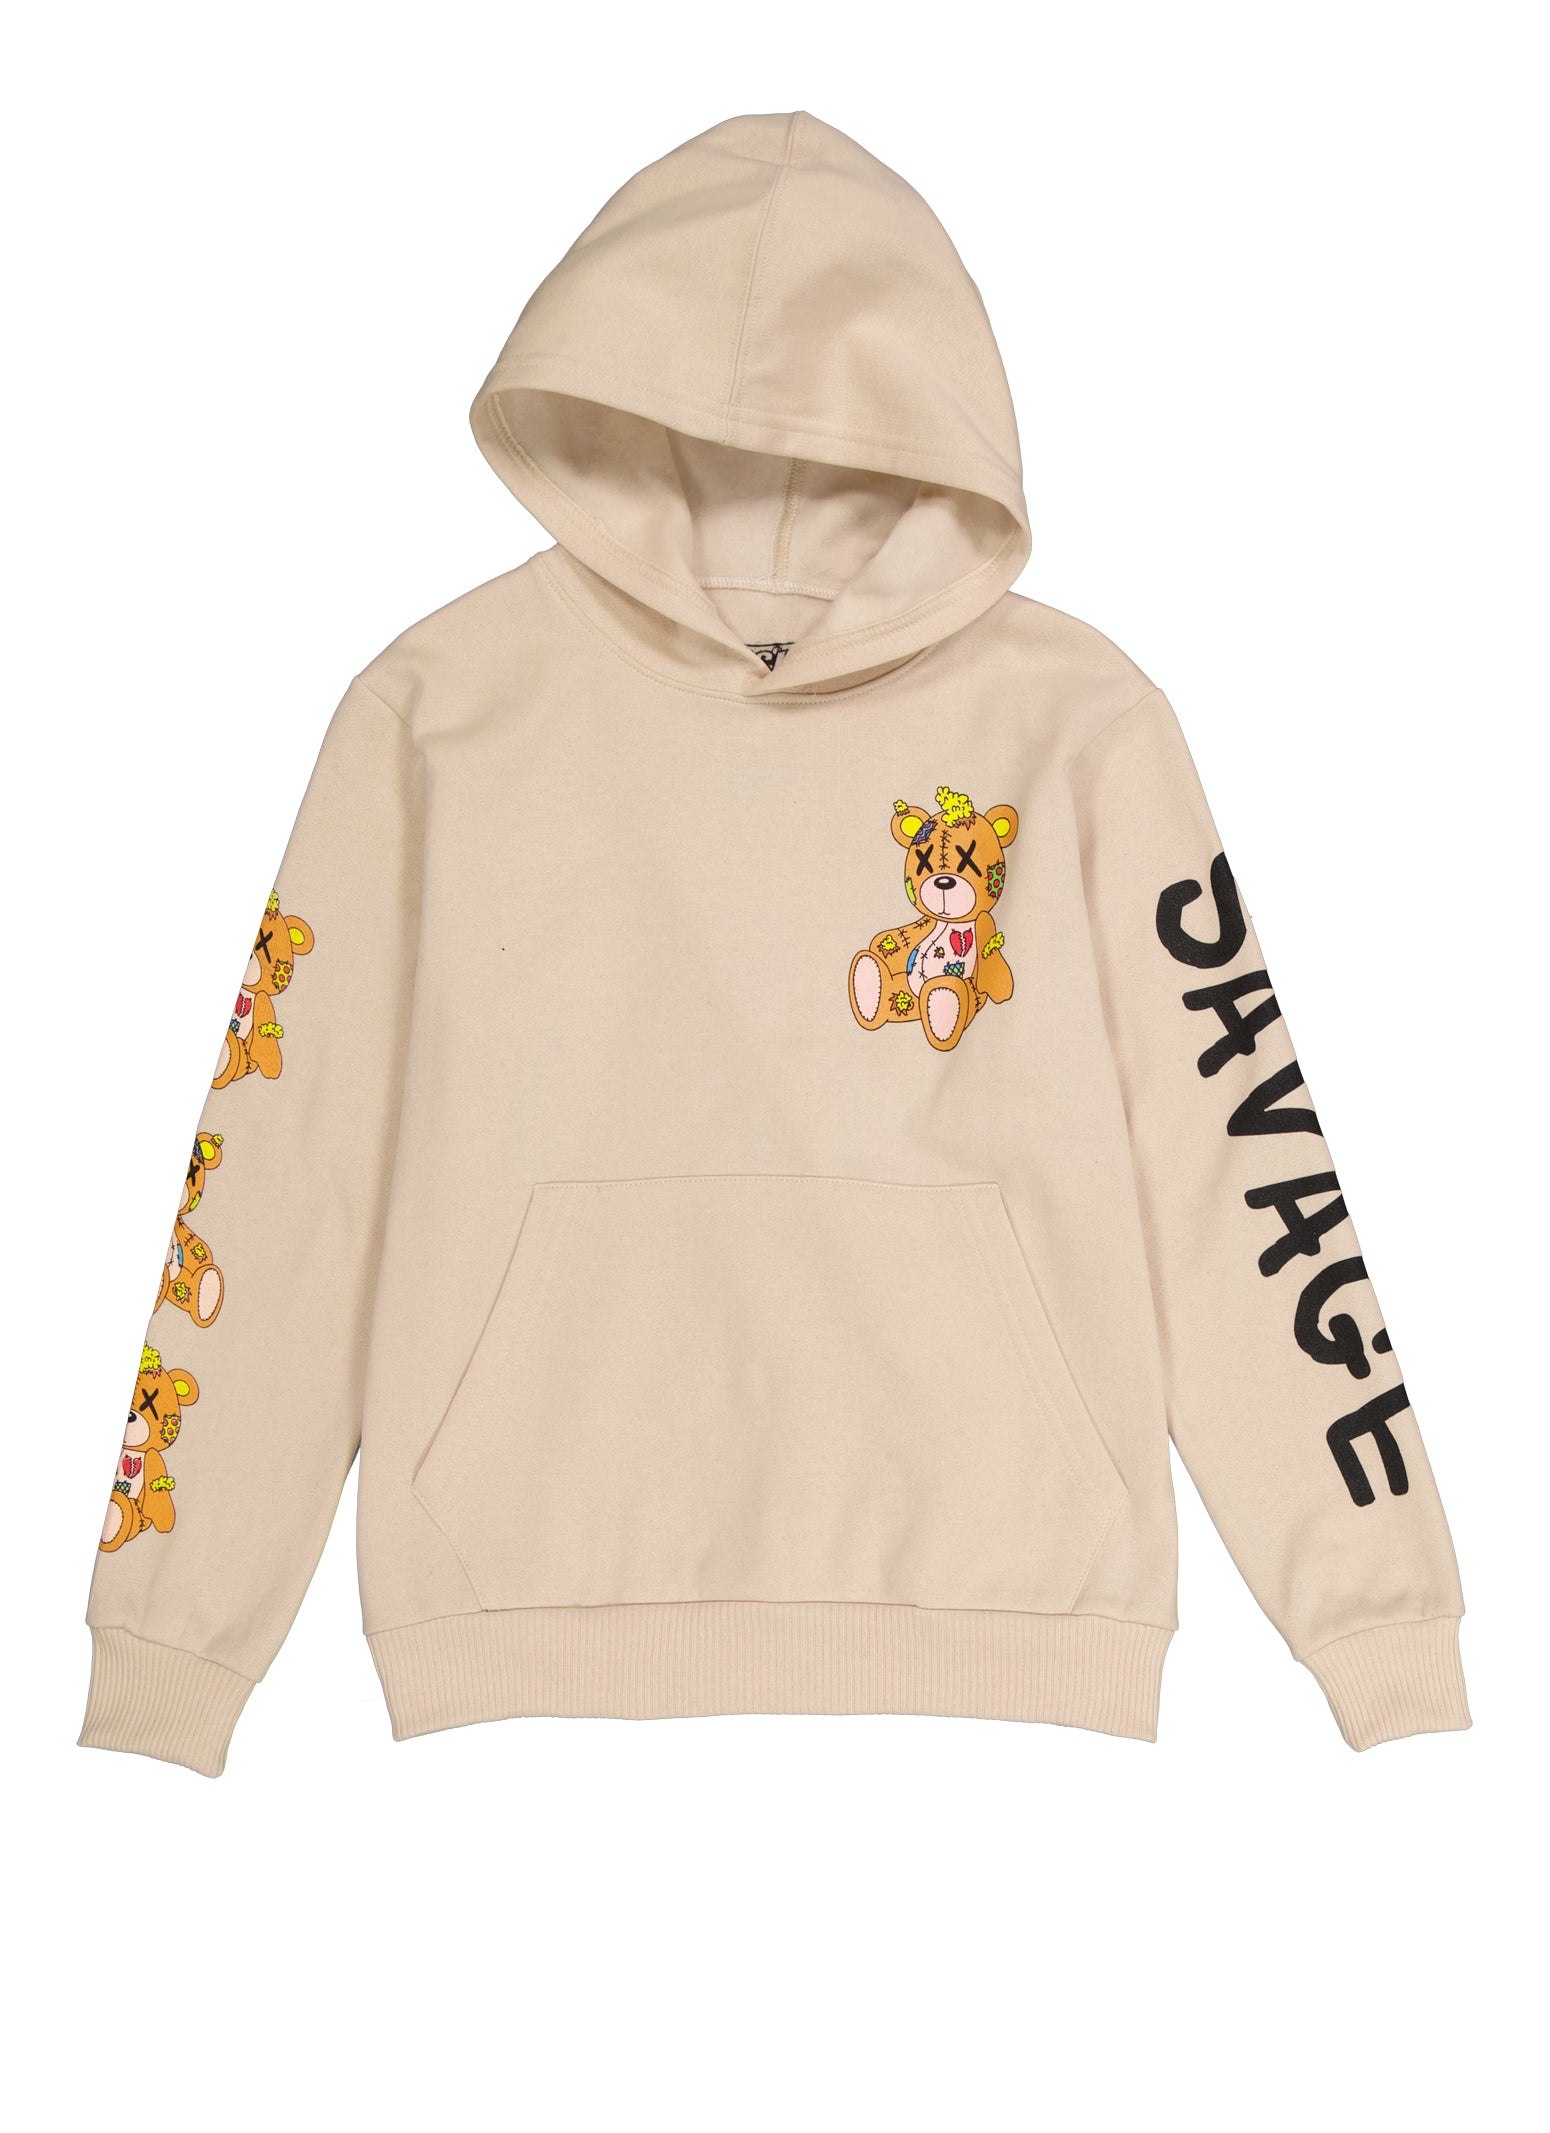 Boys Savage Bear Back Graphic Pullover Hoodie, Beige, Size M